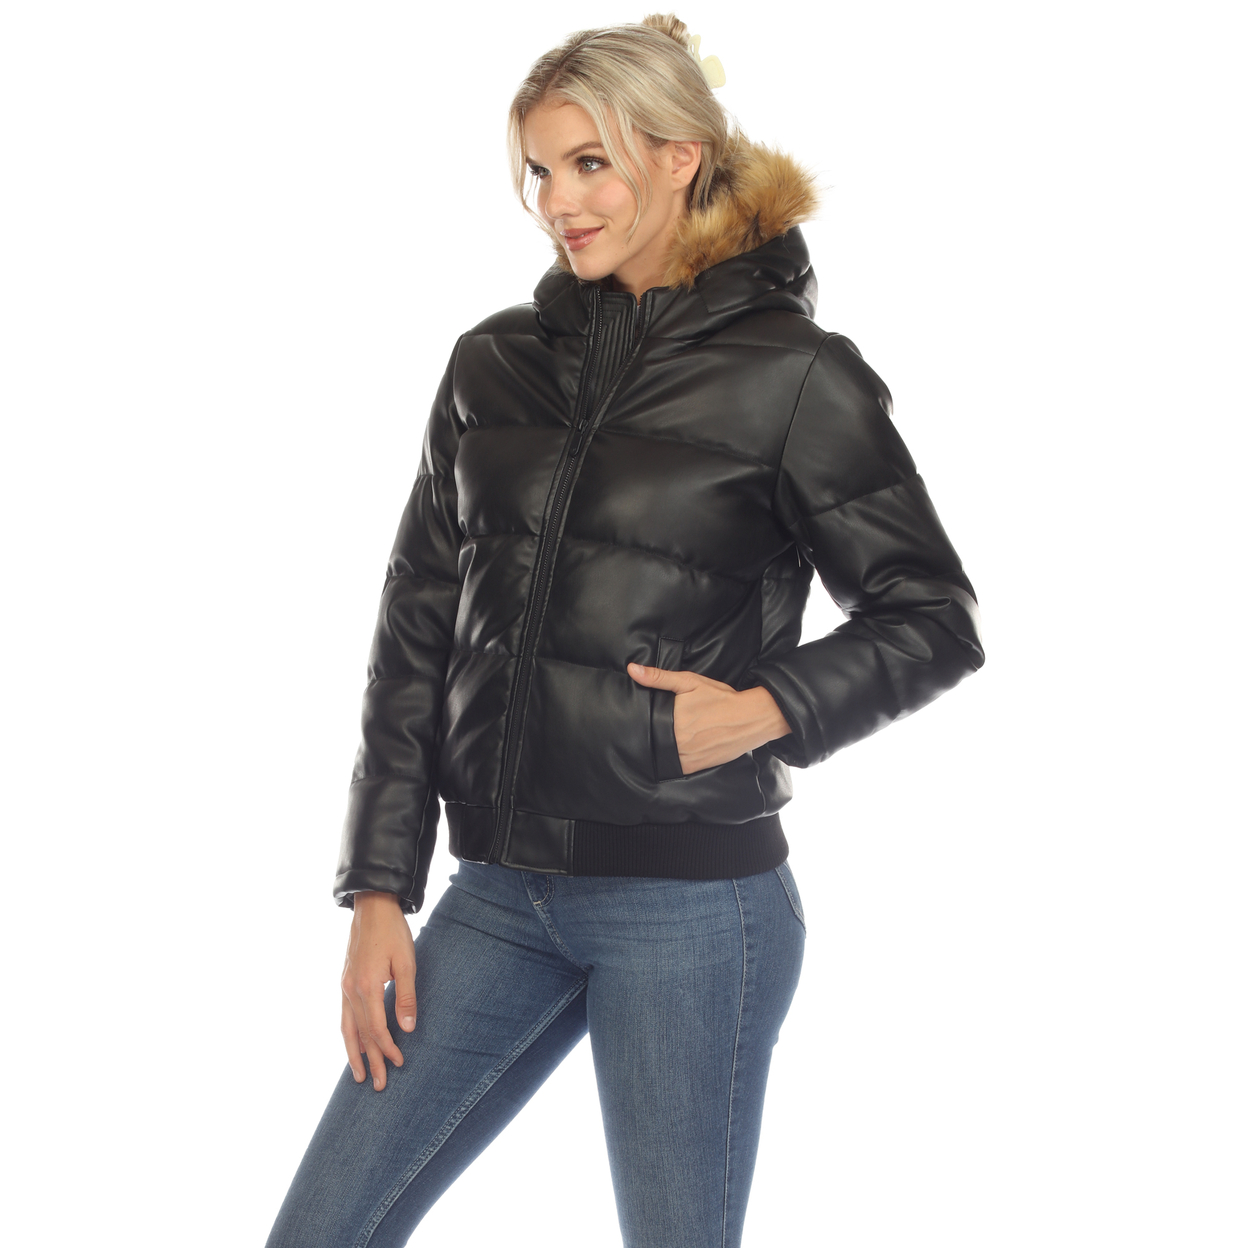 White Mark Women's Removable Fur Hoodie PU Leather Puffer Jacket - Black, 1x